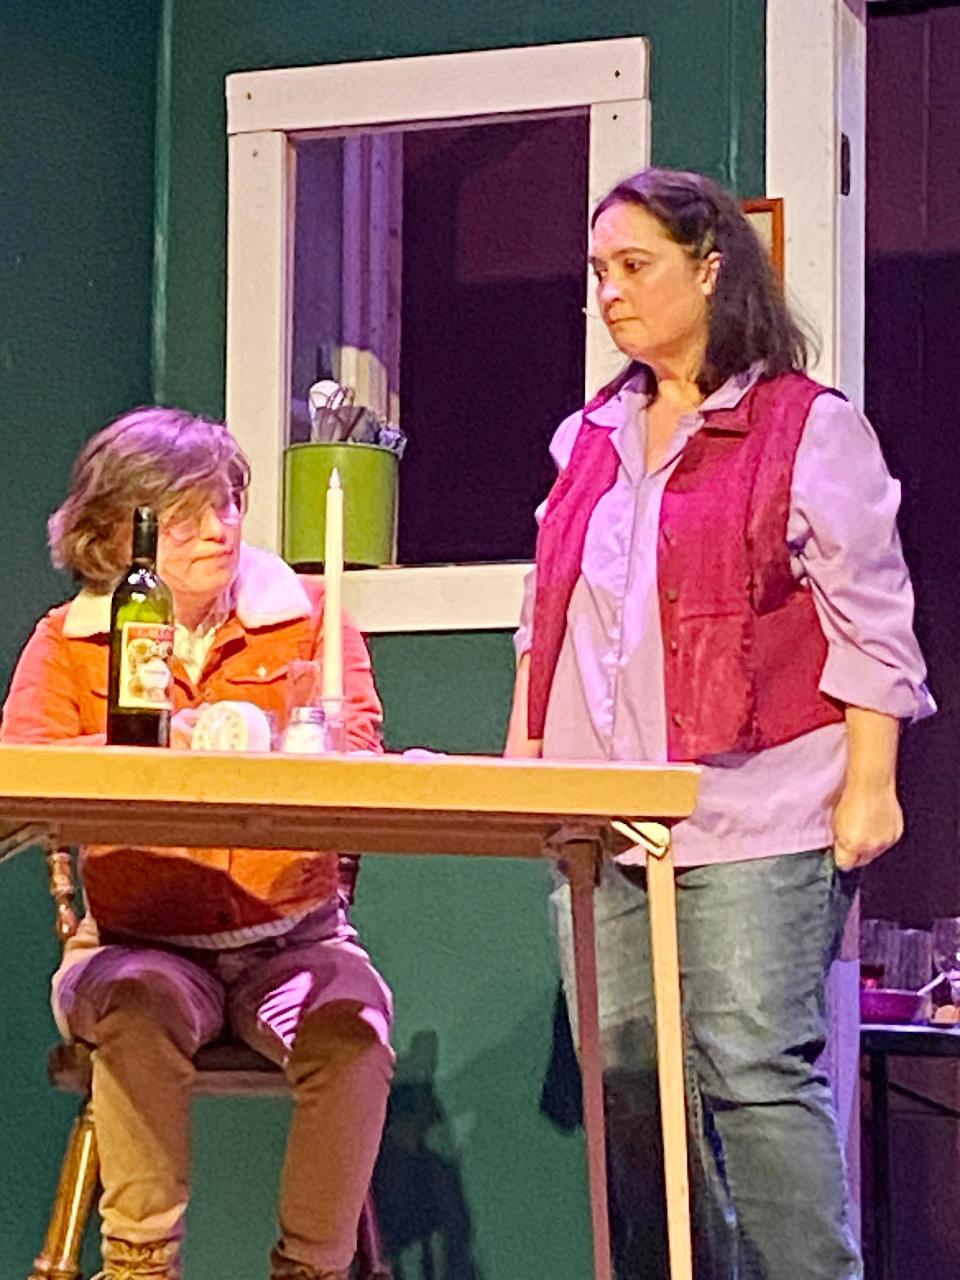 Madison McWilliams is Sheriff Buster and Melissa Crow is Annie Wilkes in a collaborative production of Stephen King's "Misery" by Actors Community Playhouse of Anniston and Theatre of Gadsden. There will be performances June 2 and 3 at the Ritz Theatre in Alabama City.